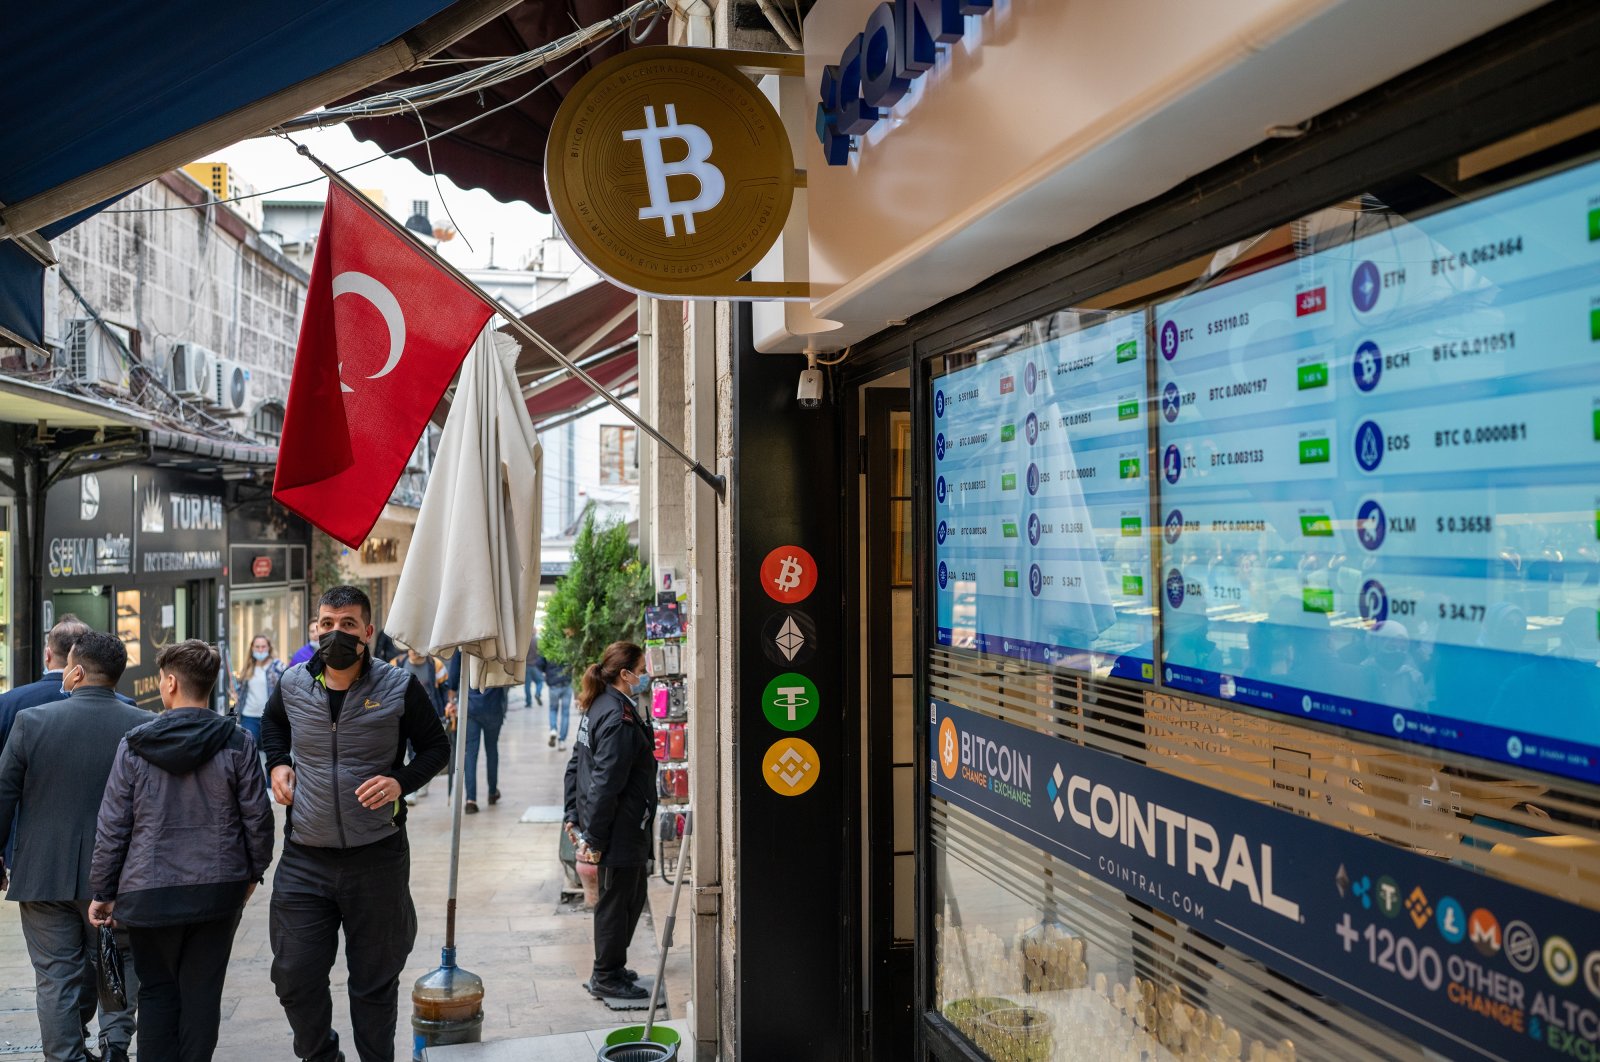 Bitcoin offices are seen in Istanbul, Turkey, Oct. 13, 2021. (Reuters Photo)